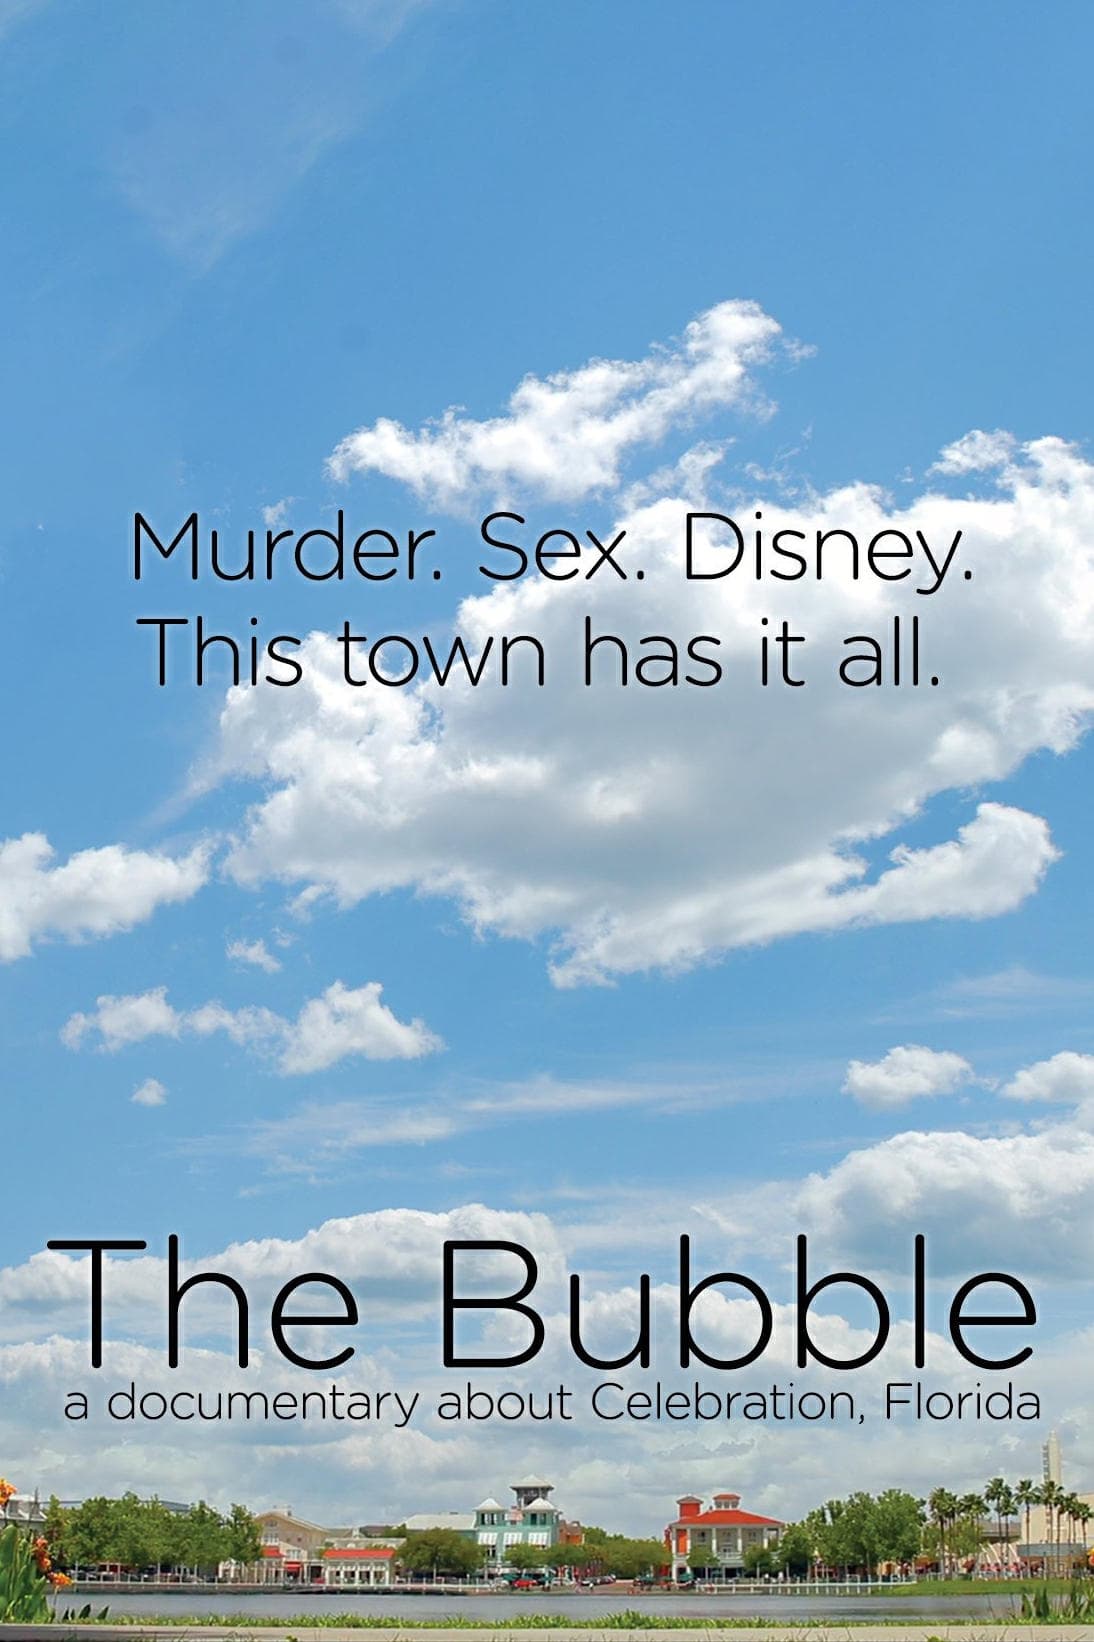 Watch The Bubble A Documentary Film About Celebration, Florida (2013) Full Movie Online photo pic